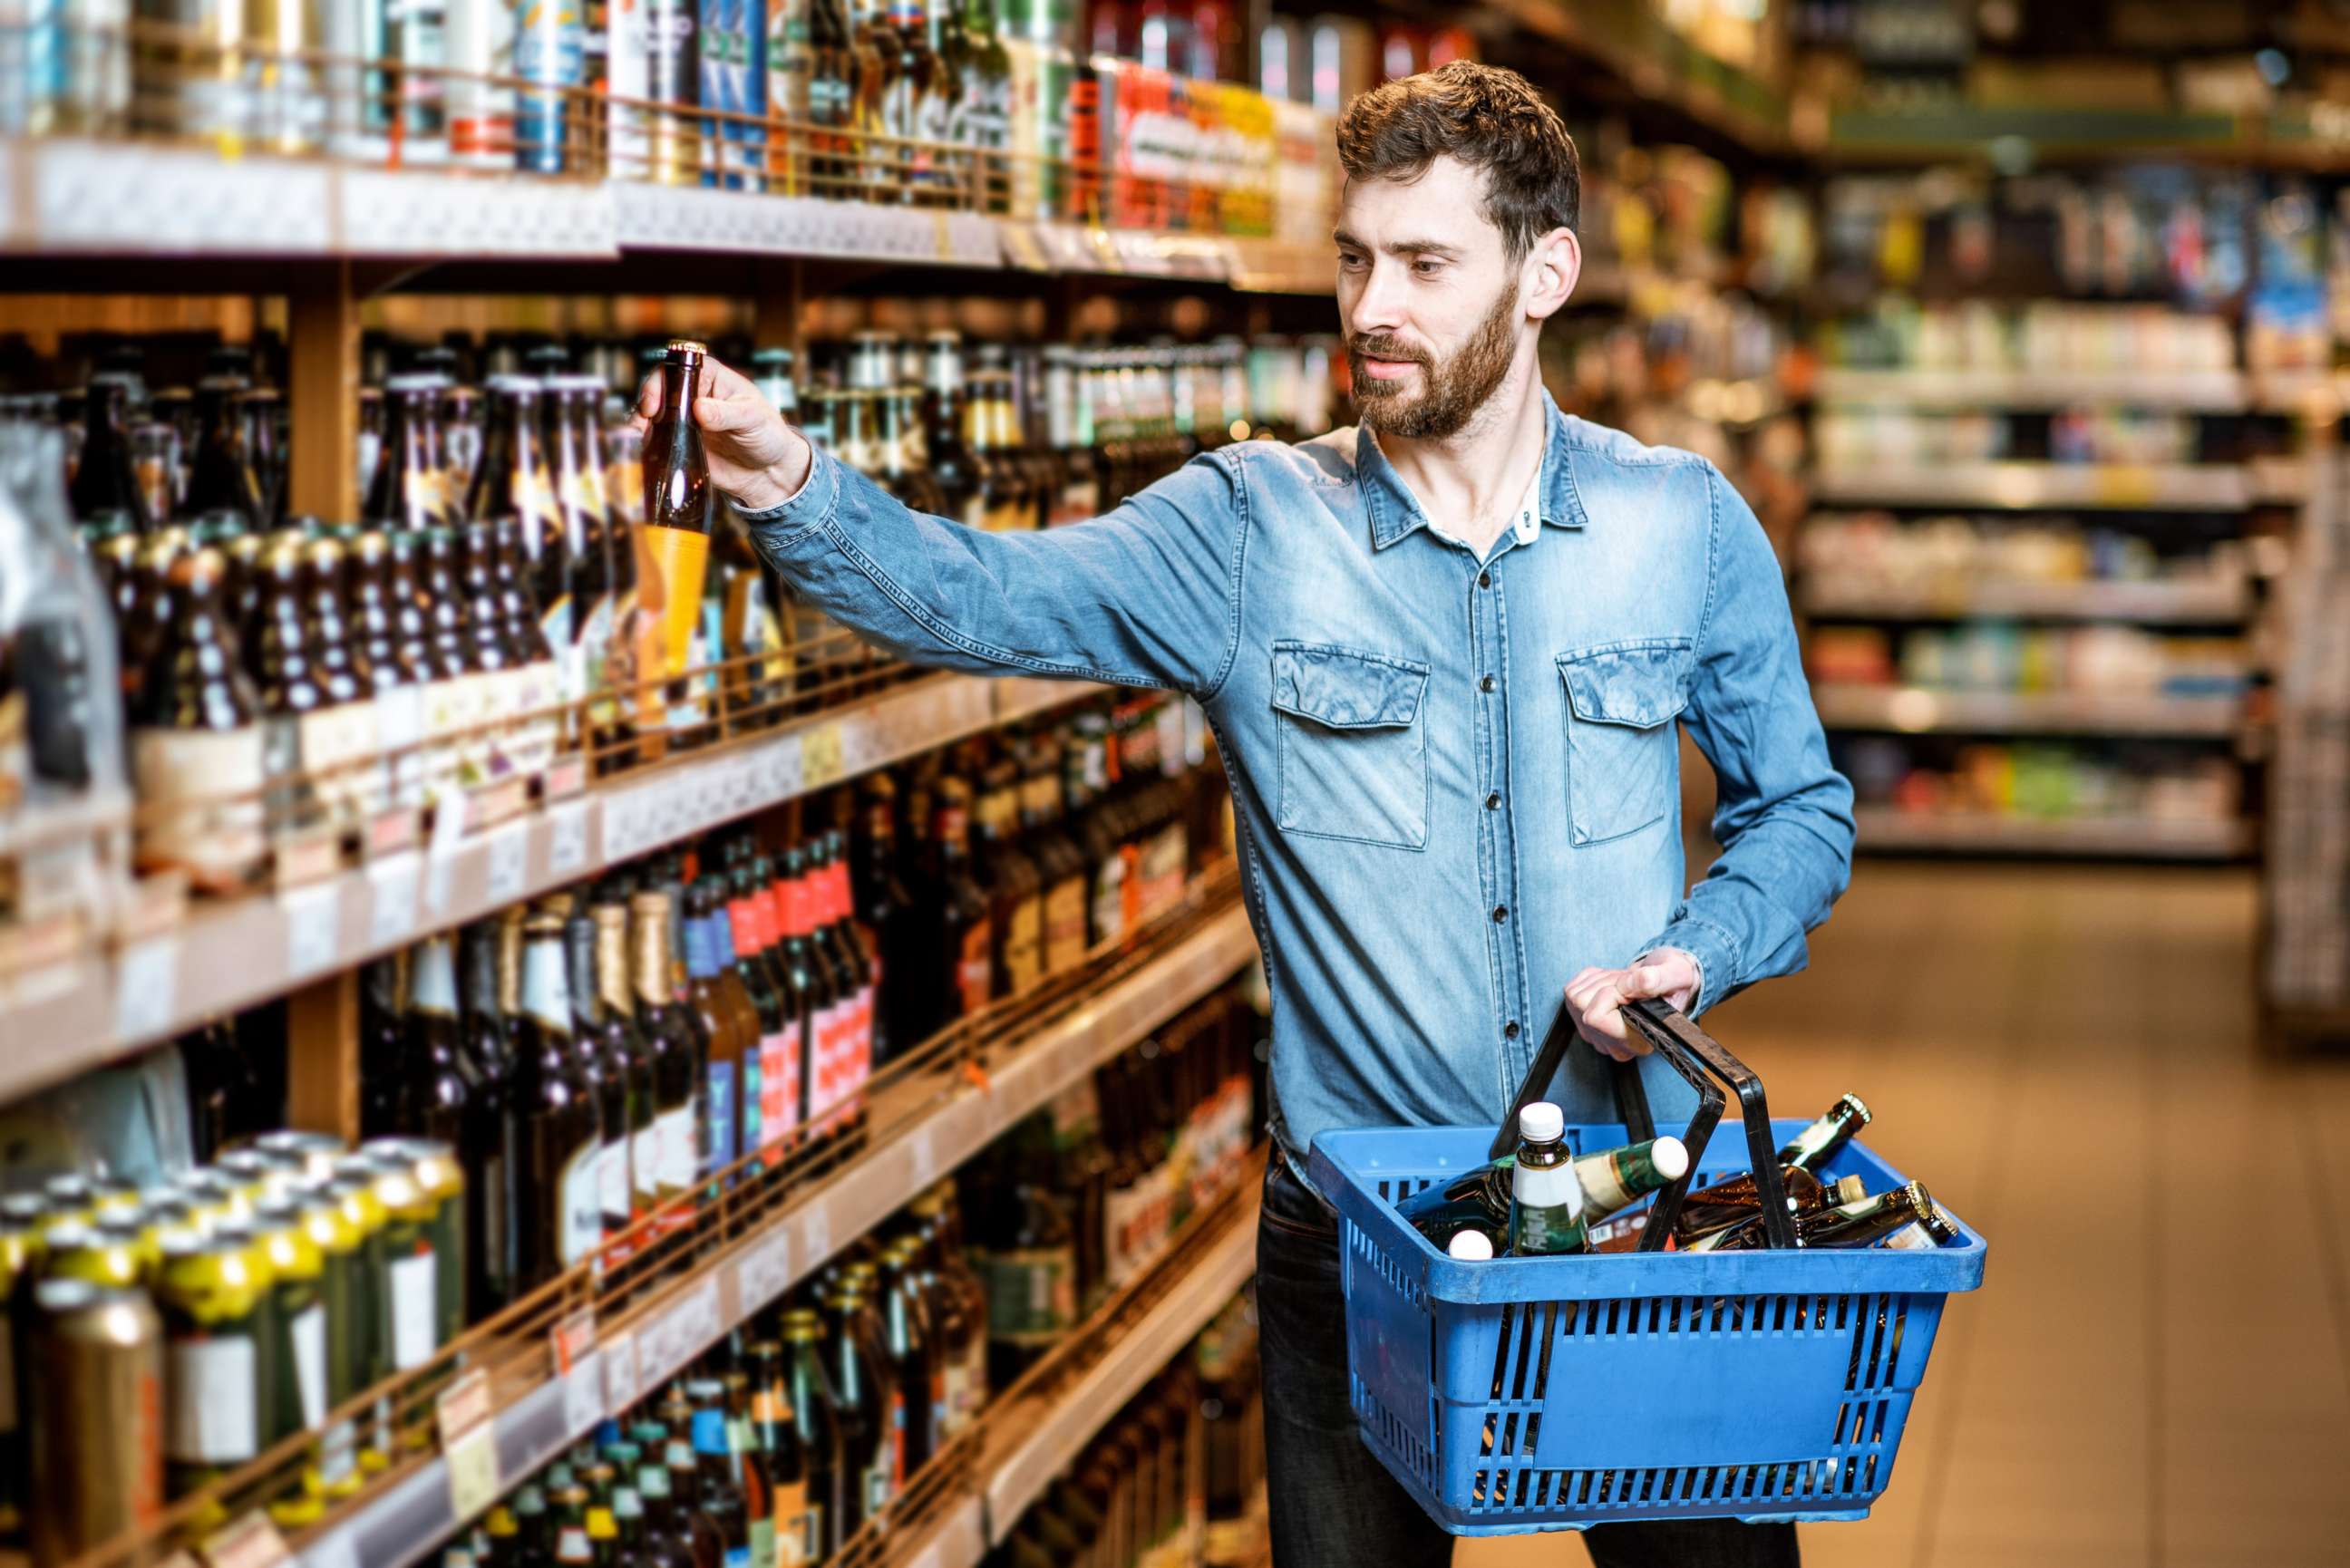 PHOTO: A man chooses a beer from a shelf in this stock photo.